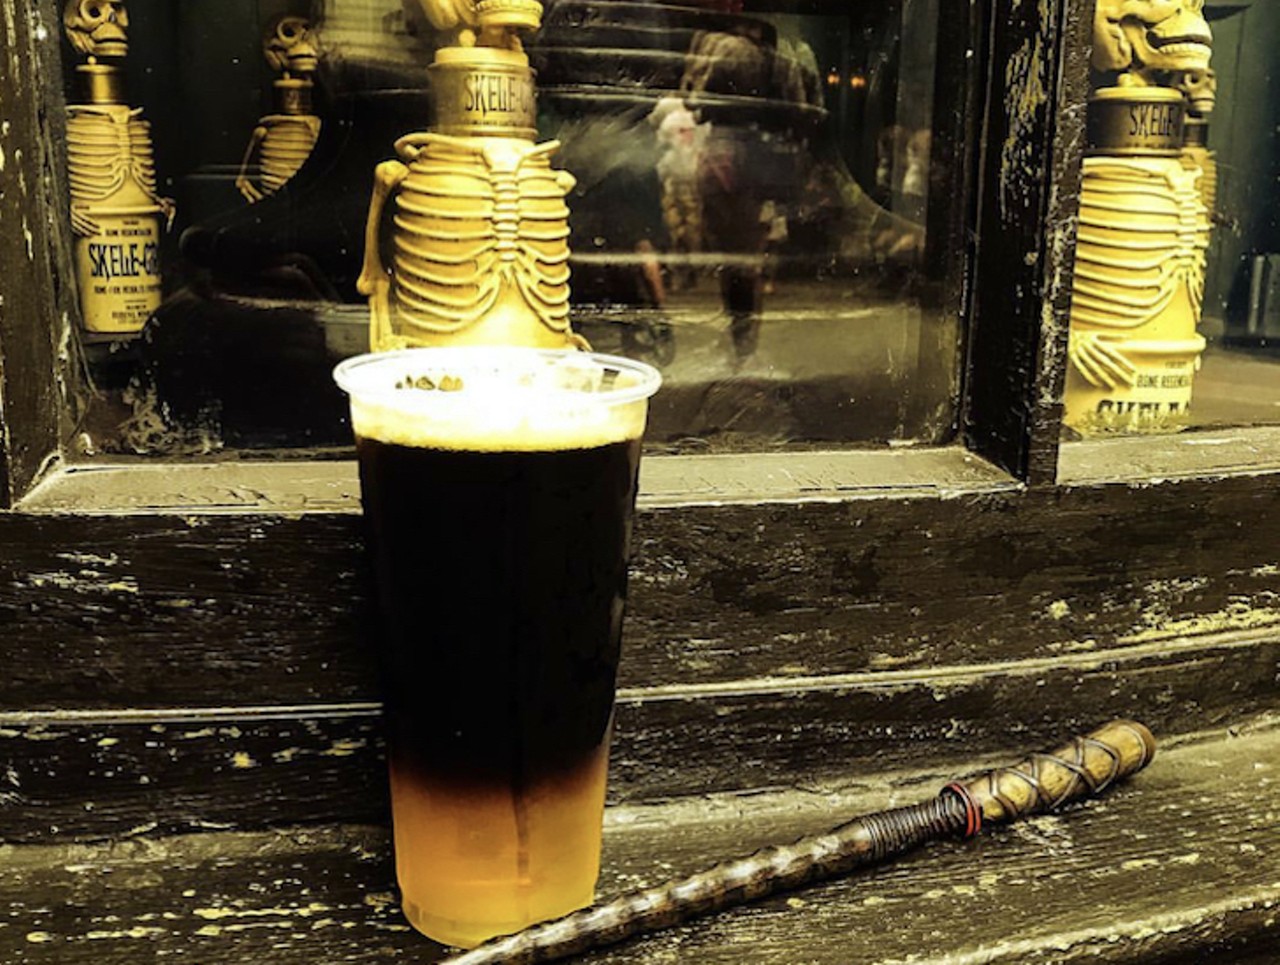 The Triple  (formerly Deathly Hallows) 
Hog&#146;s Head, Islands of Adventure
Layered with two types of beer and cider this drink will let you have the most fun at the Wizarding World of Harry Potter. The Triple is on the secret menu so you have to ask for a layered Strongbow Cider, Hog&#146;s Head Ale, and Guinness.
Photo via The Triple/Orlando Informer